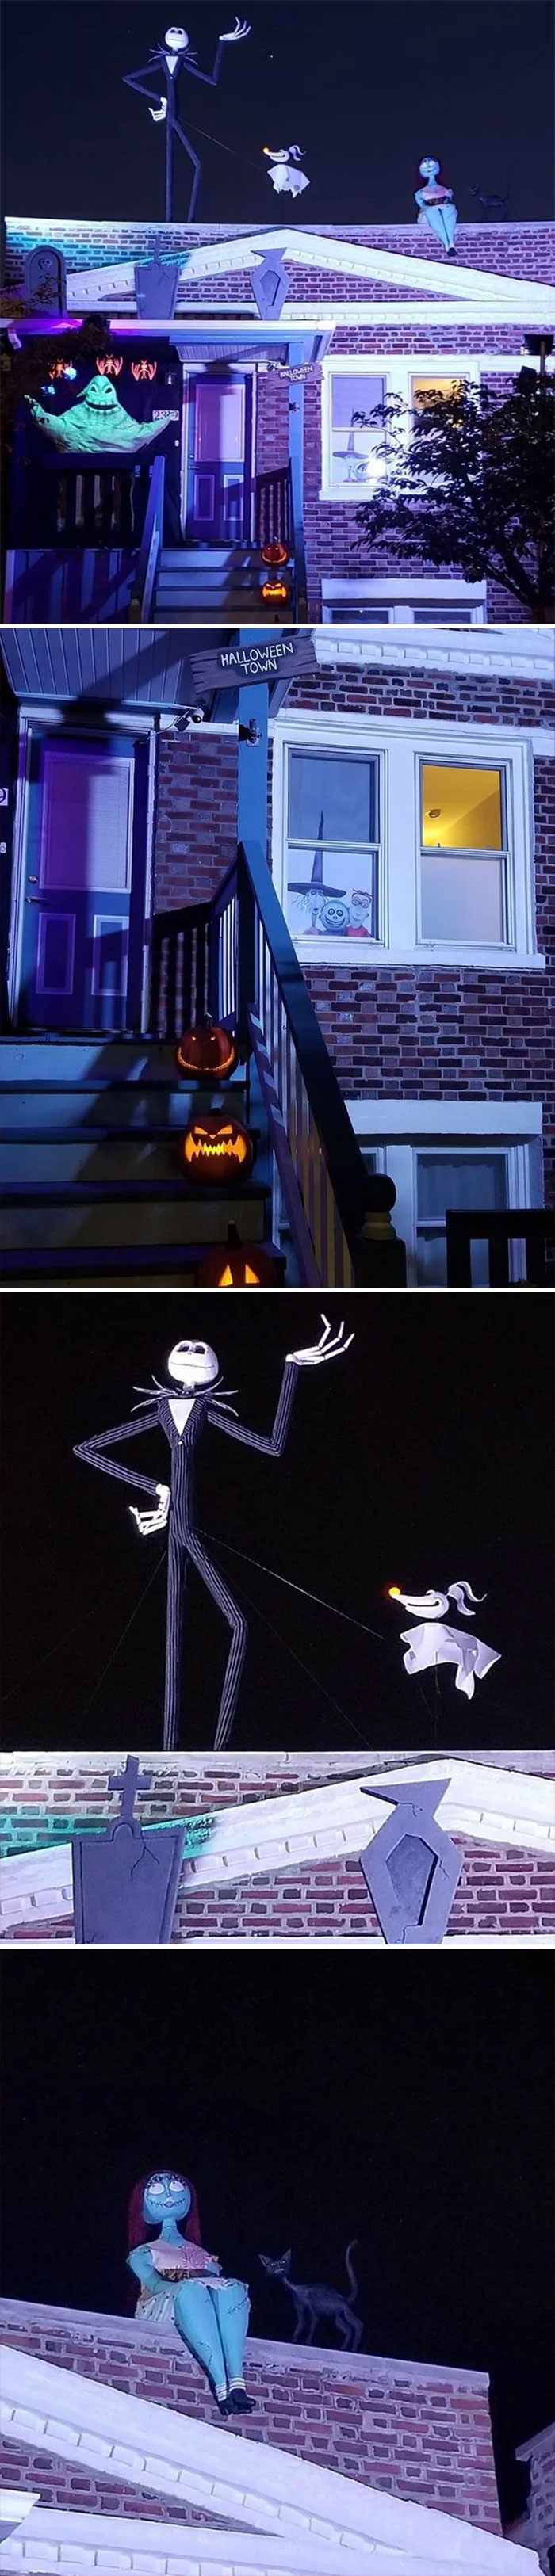 My Friend Spent About 3 Months Building Custom-Made Characters From “The Nightmare Before Christmas” To Decorate His House For Halloween.